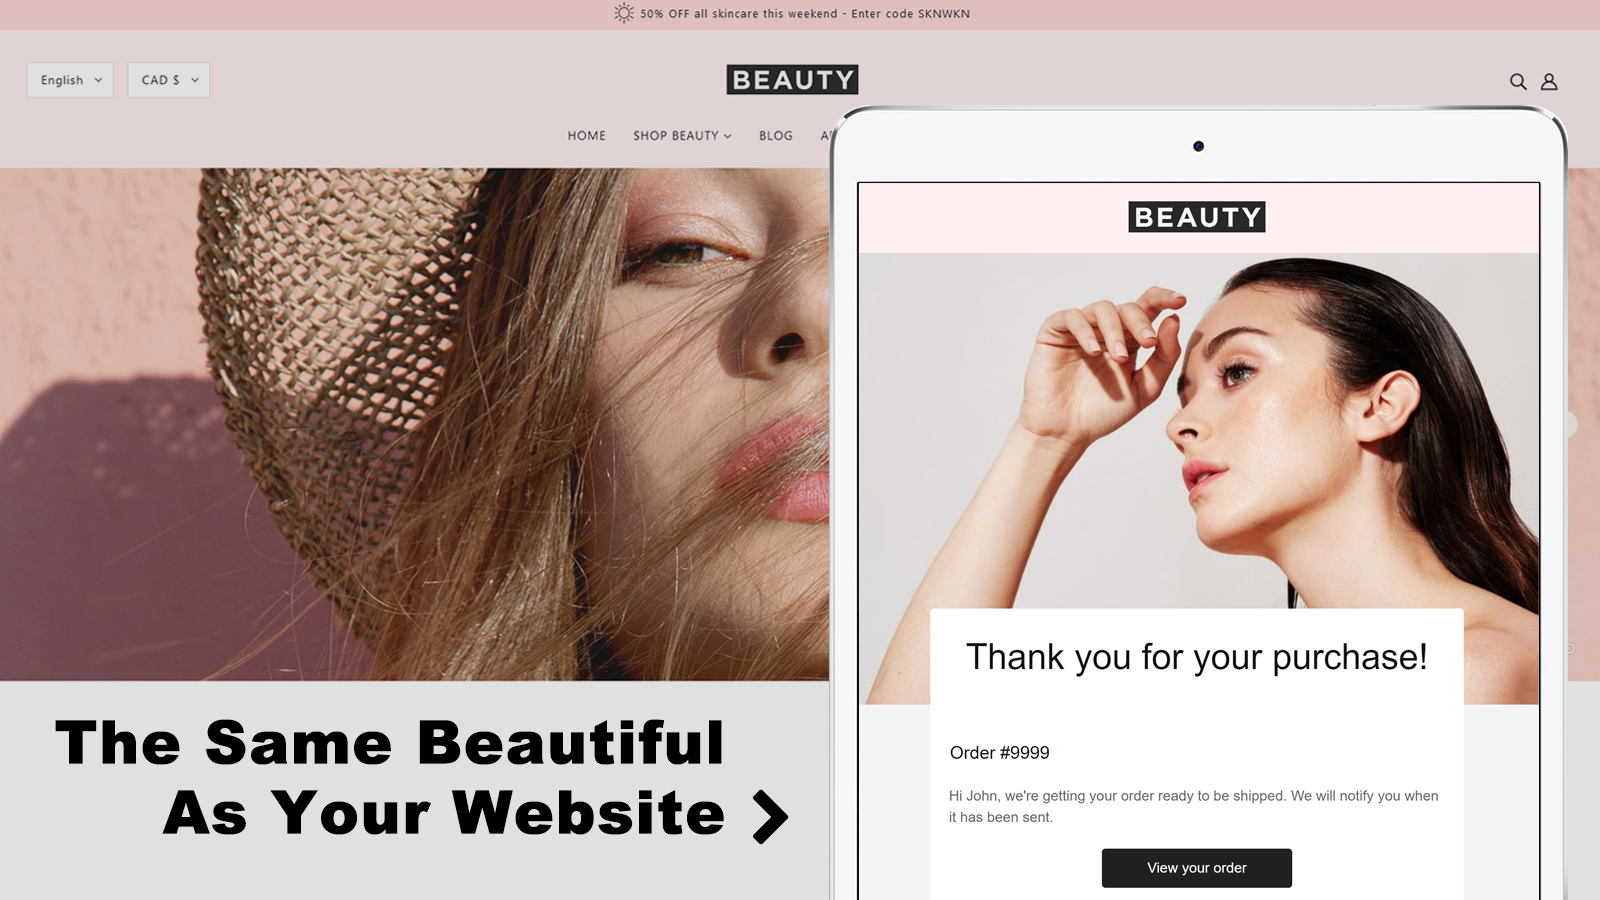 The Same Beautiful as Your Website